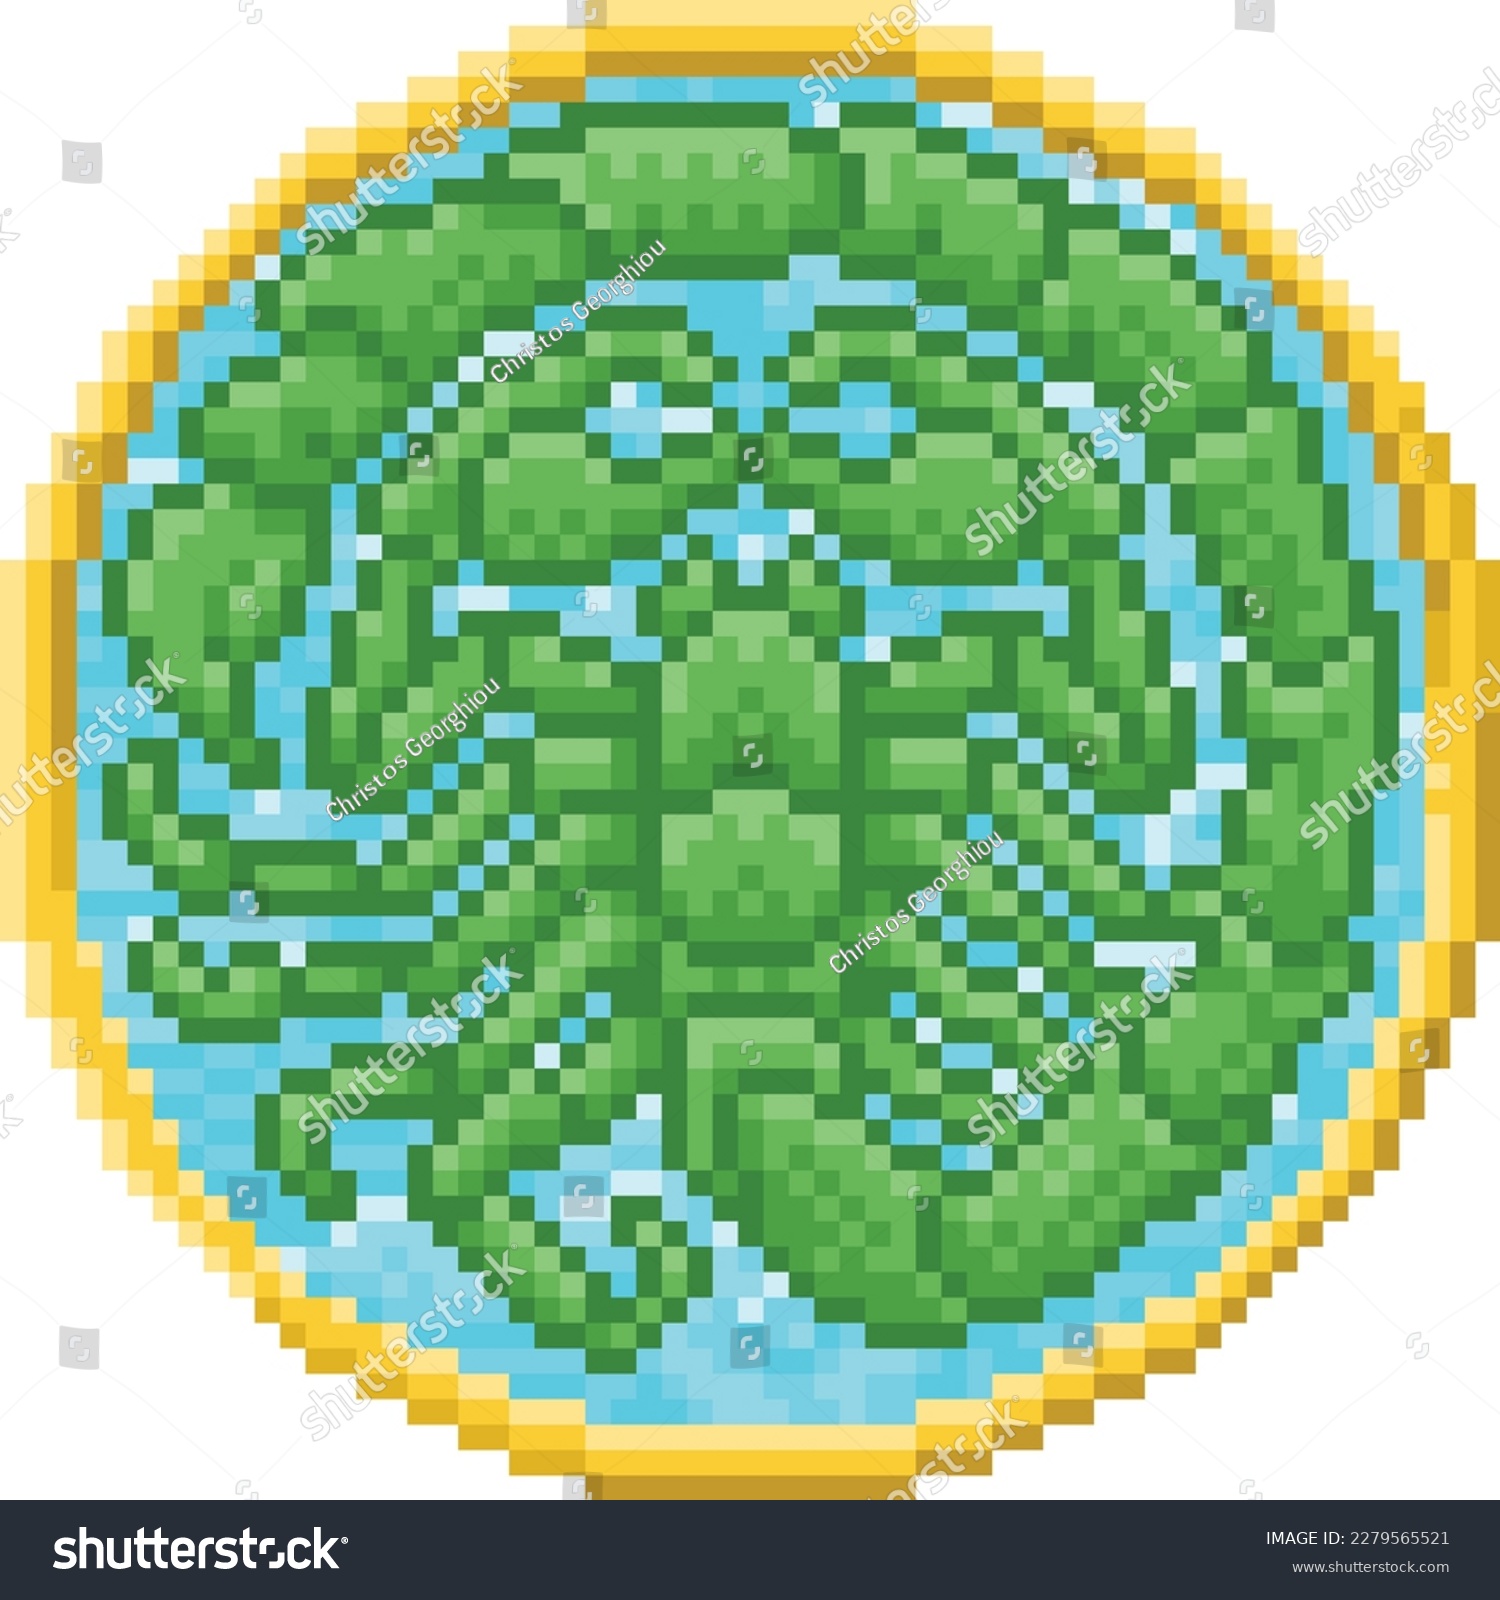 SVG of A zodiac horoscope or astrology Scorpio scorpion sign in a retro video game arcade 8 bit pixel art style svg